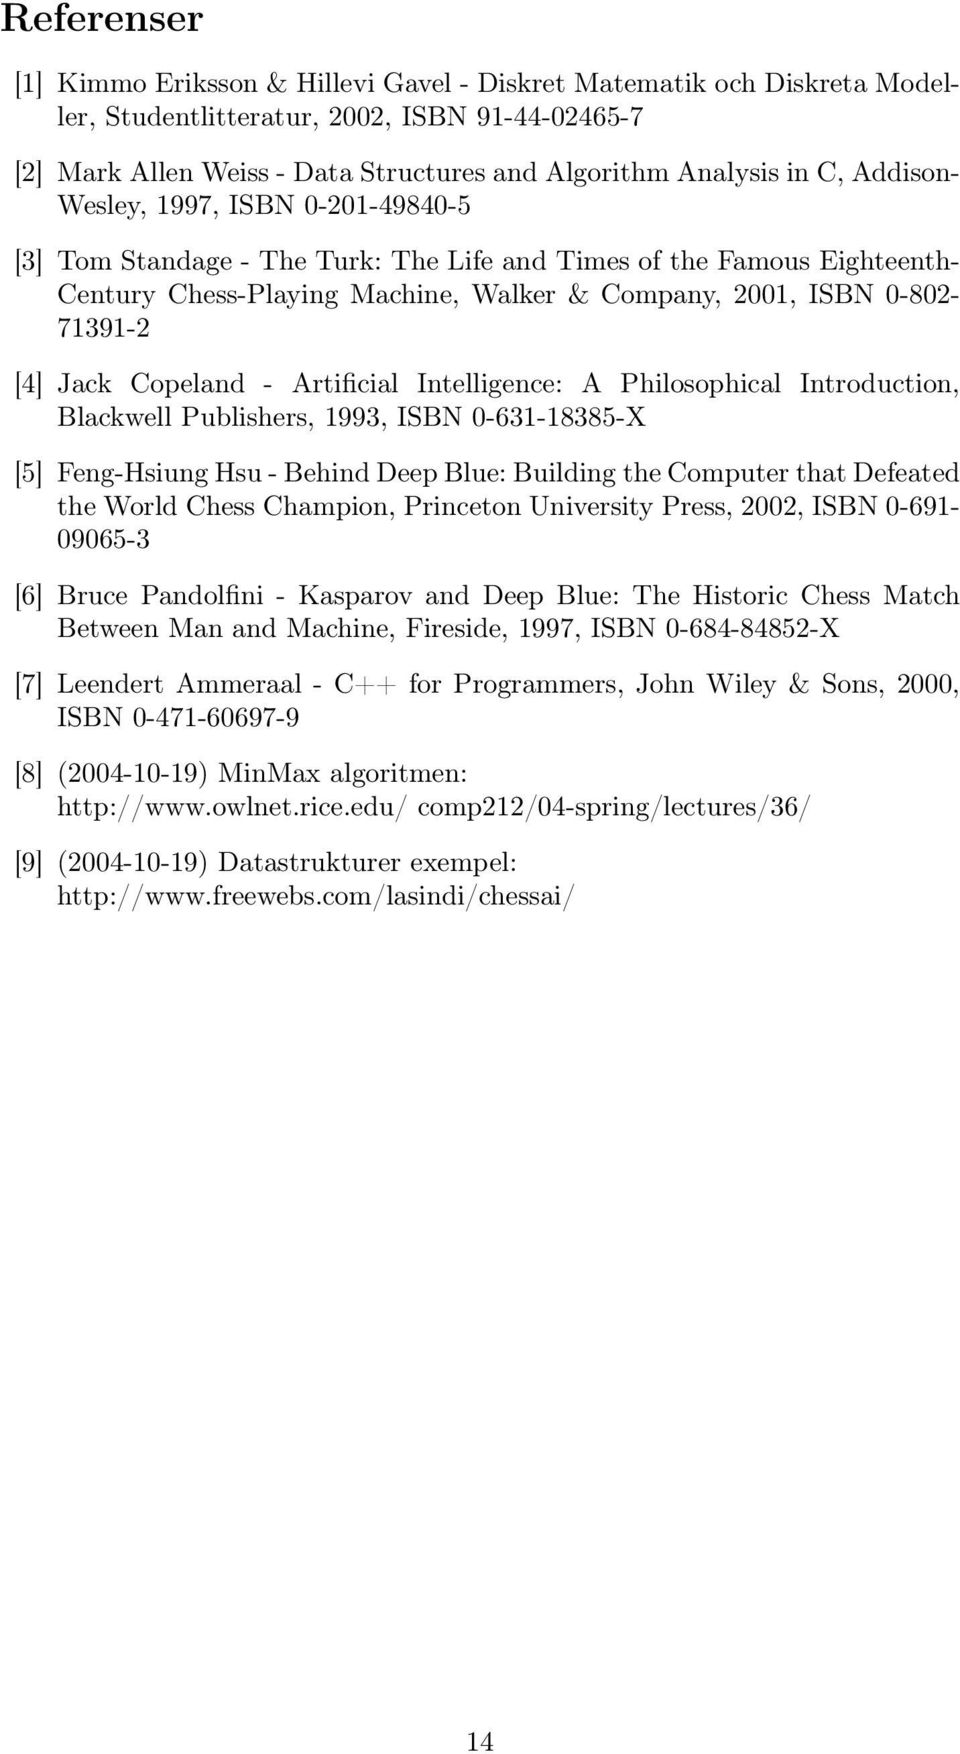 Jack Copeland - Artificial Intelligence: A Philosophical Introduction, Blackwell Publishers, 1993, ISBN 0-631-18385-X [5] Feng-Hsiung Hsu - Behind Deep Blue: Building the Computer that Defeated the